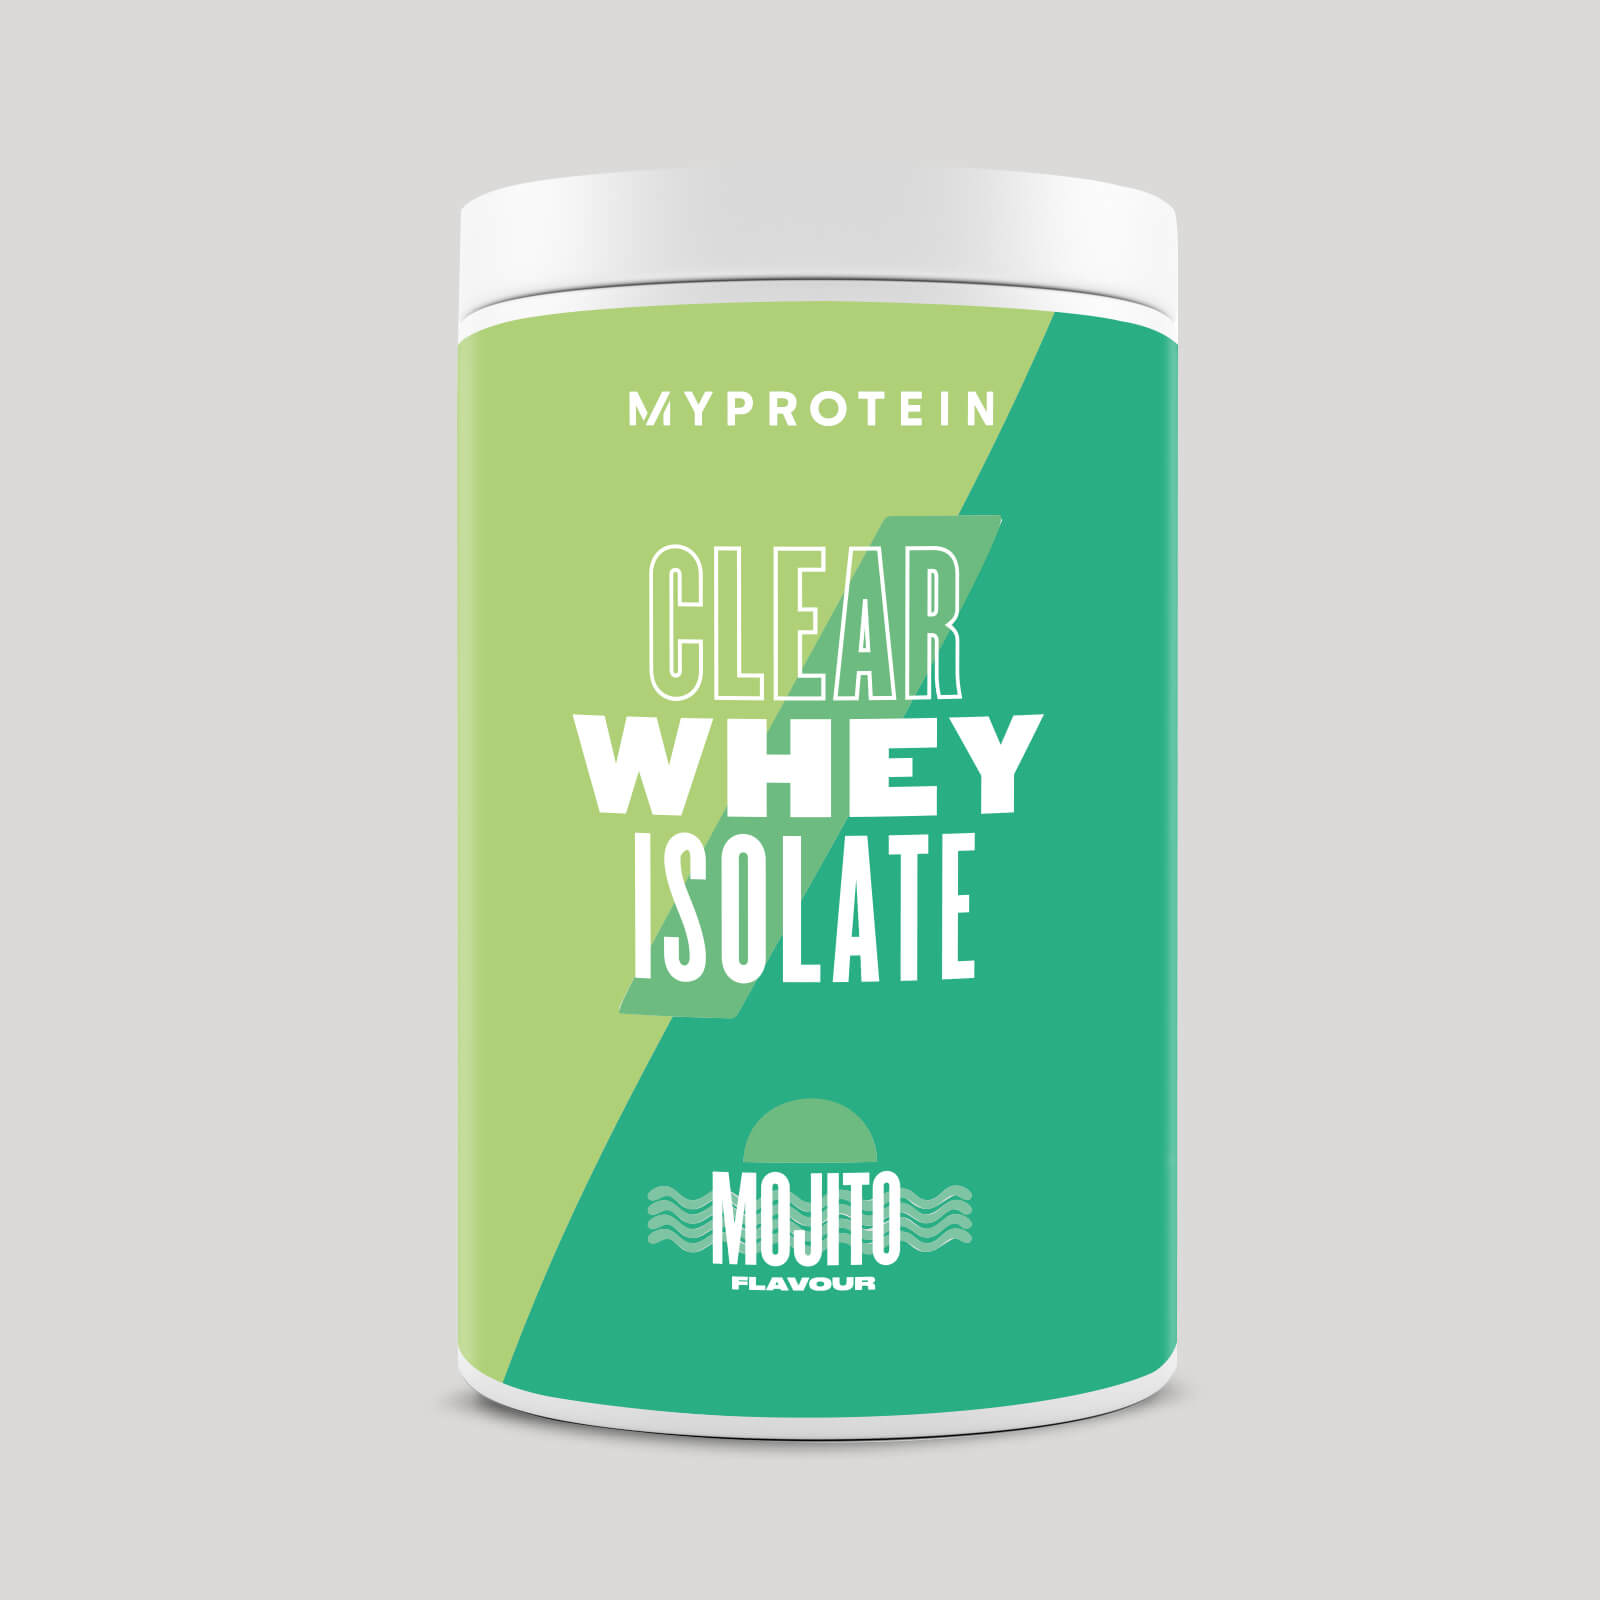 Myprotein Clear Whey Isolate - 20servings - Mojito